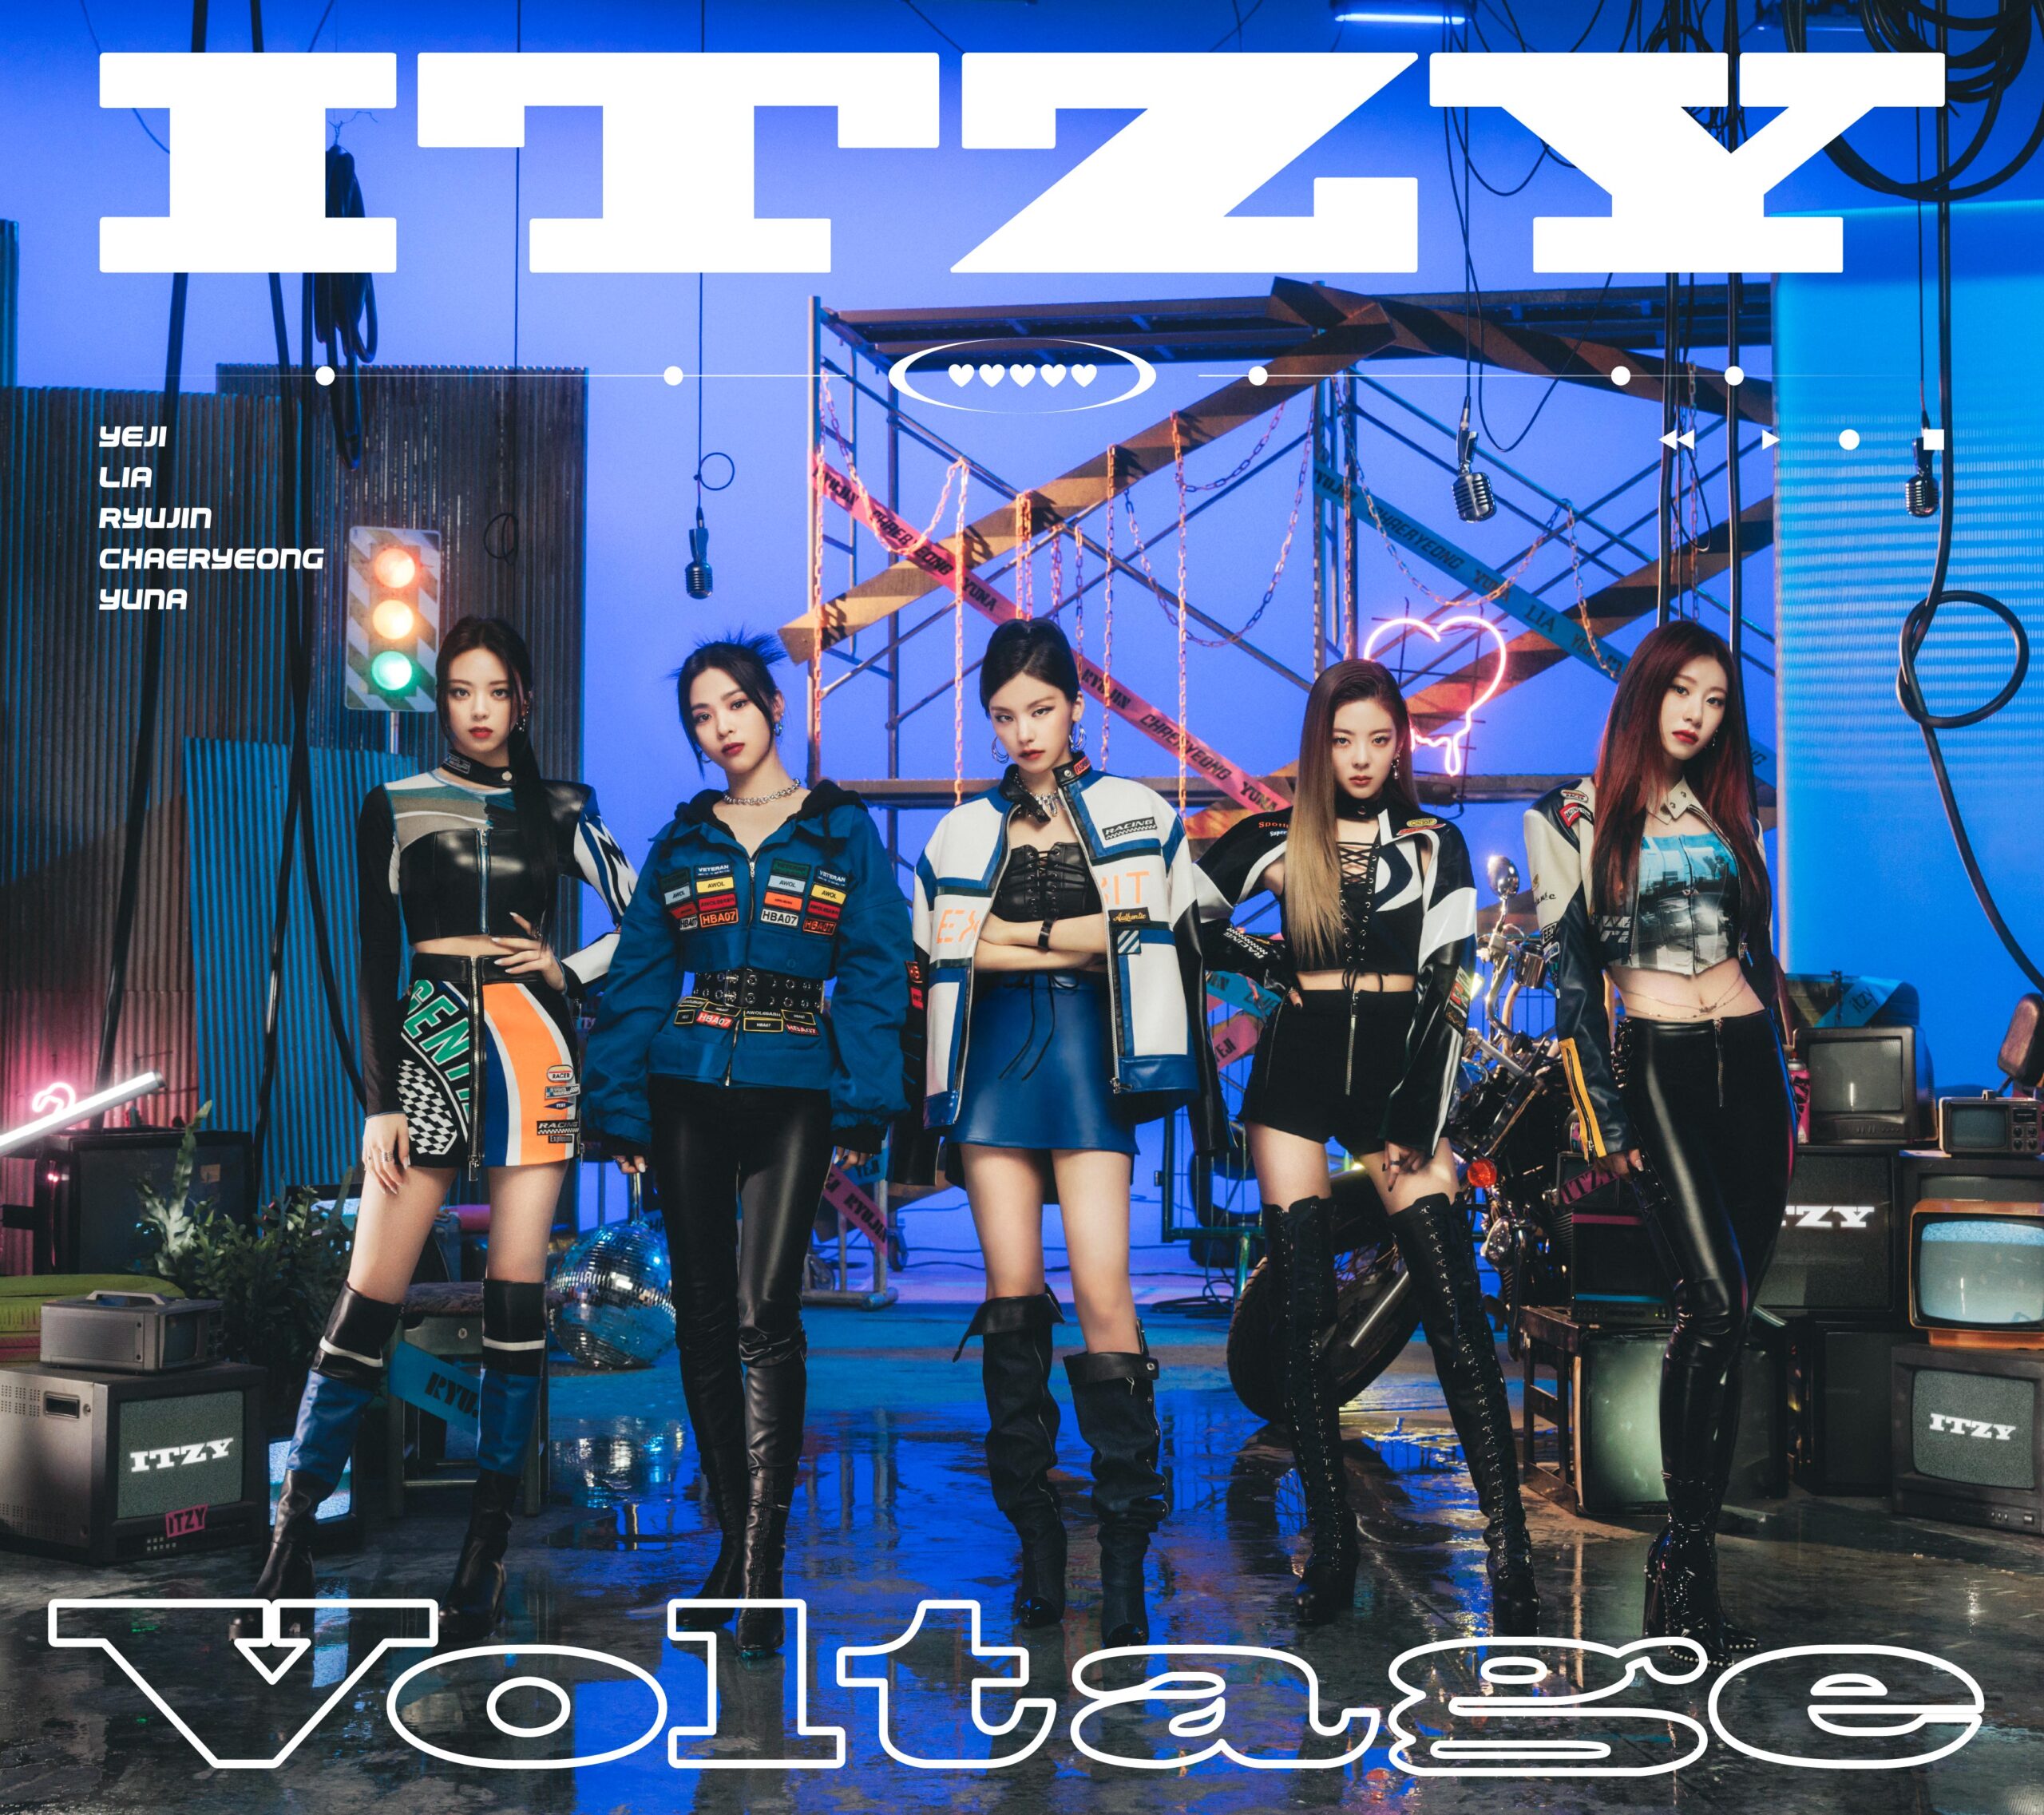 itzy voltage チェキ リュジン - www.thesims4.it